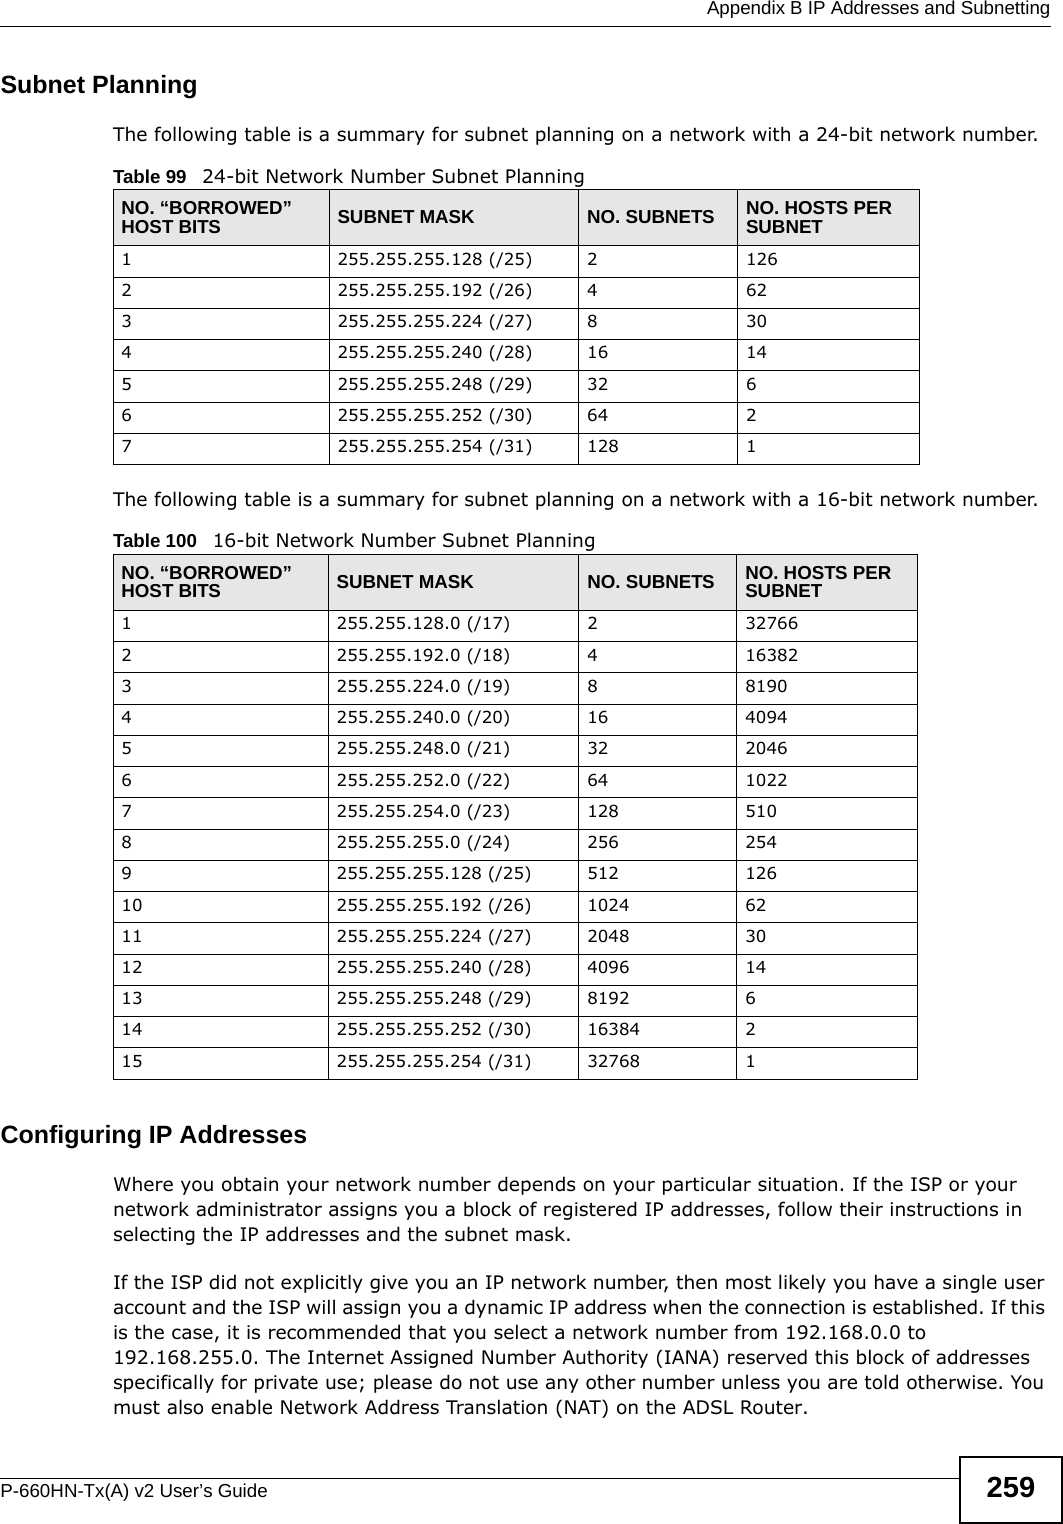  Appendix B IP Addresses and SubnettingP-660HN-Tx(A) v2 User’s Guide 259Subnet PlanningThe following table is a summary for subnet planning on a network with a 24-bit network number.The following table is a summary for subnet planning on a network with a 16-bit network number. Configuring IP AddressesWhere you obtain your network number depends on your particular situation. If the ISP or your network administrator assigns you a block of registered IP addresses, follow their instructions in selecting the IP addresses and the subnet mask.If the ISP did not explicitly give you an IP network number, then most likely you have a single user account and the ISP will assign you a dynamic IP address when the connection is established. If this is the case, it is recommended that you select a network number from 192.168.0.0 to 192.168.255.0. The Internet Assigned Number Authority (IANA) reserved this block of addresses specifically for private use; please do not use any other number unless you are told otherwise. You must also enable Network Address Translation (NAT) on the ADSL Router. Table 99   24-bit Network Number Subnet PlanningNO. “BORROWED” HOST BITS SUBNET MASK NO. SUBNETS NO. HOSTS PER SUBNET1255.255.255.128 (/25) 21262255.255.255.192 (/26) 4623255.255.255.224 (/27) 8304255.255.255.240 (/28) 16 145255.255.255.248 (/29) 32 66255.255.255.252 (/30) 64 27255.255.255.254 (/31) 128 1Table 100   16-bit Network Number Subnet PlanningNO. “BORROWED” HOST BITS SUBNET MASK NO. SUBNETS NO. HOSTS PER SUBNET1255.255.128.0 (/17) 2327662255.255.192.0 (/18) 4163823255.255.224.0 (/19) 881904255.255.240.0 (/20) 16 40945255.255.248.0 (/21) 32 20466255.255.252.0 (/22) 64 10227255.255.254.0 (/23) 128 5108255.255.255.0 (/24) 256 2549255.255.255.128 (/25) 512 12610 255.255.255.192 (/26) 1024 6211 255.255.255.224 (/27) 2048 3012 255.255.255.240 (/28) 4096 1413 255.255.255.248 (/29) 8192 614 255.255.255.252 (/30) 16384 215 255.255.255.254 (/31) 32768 1